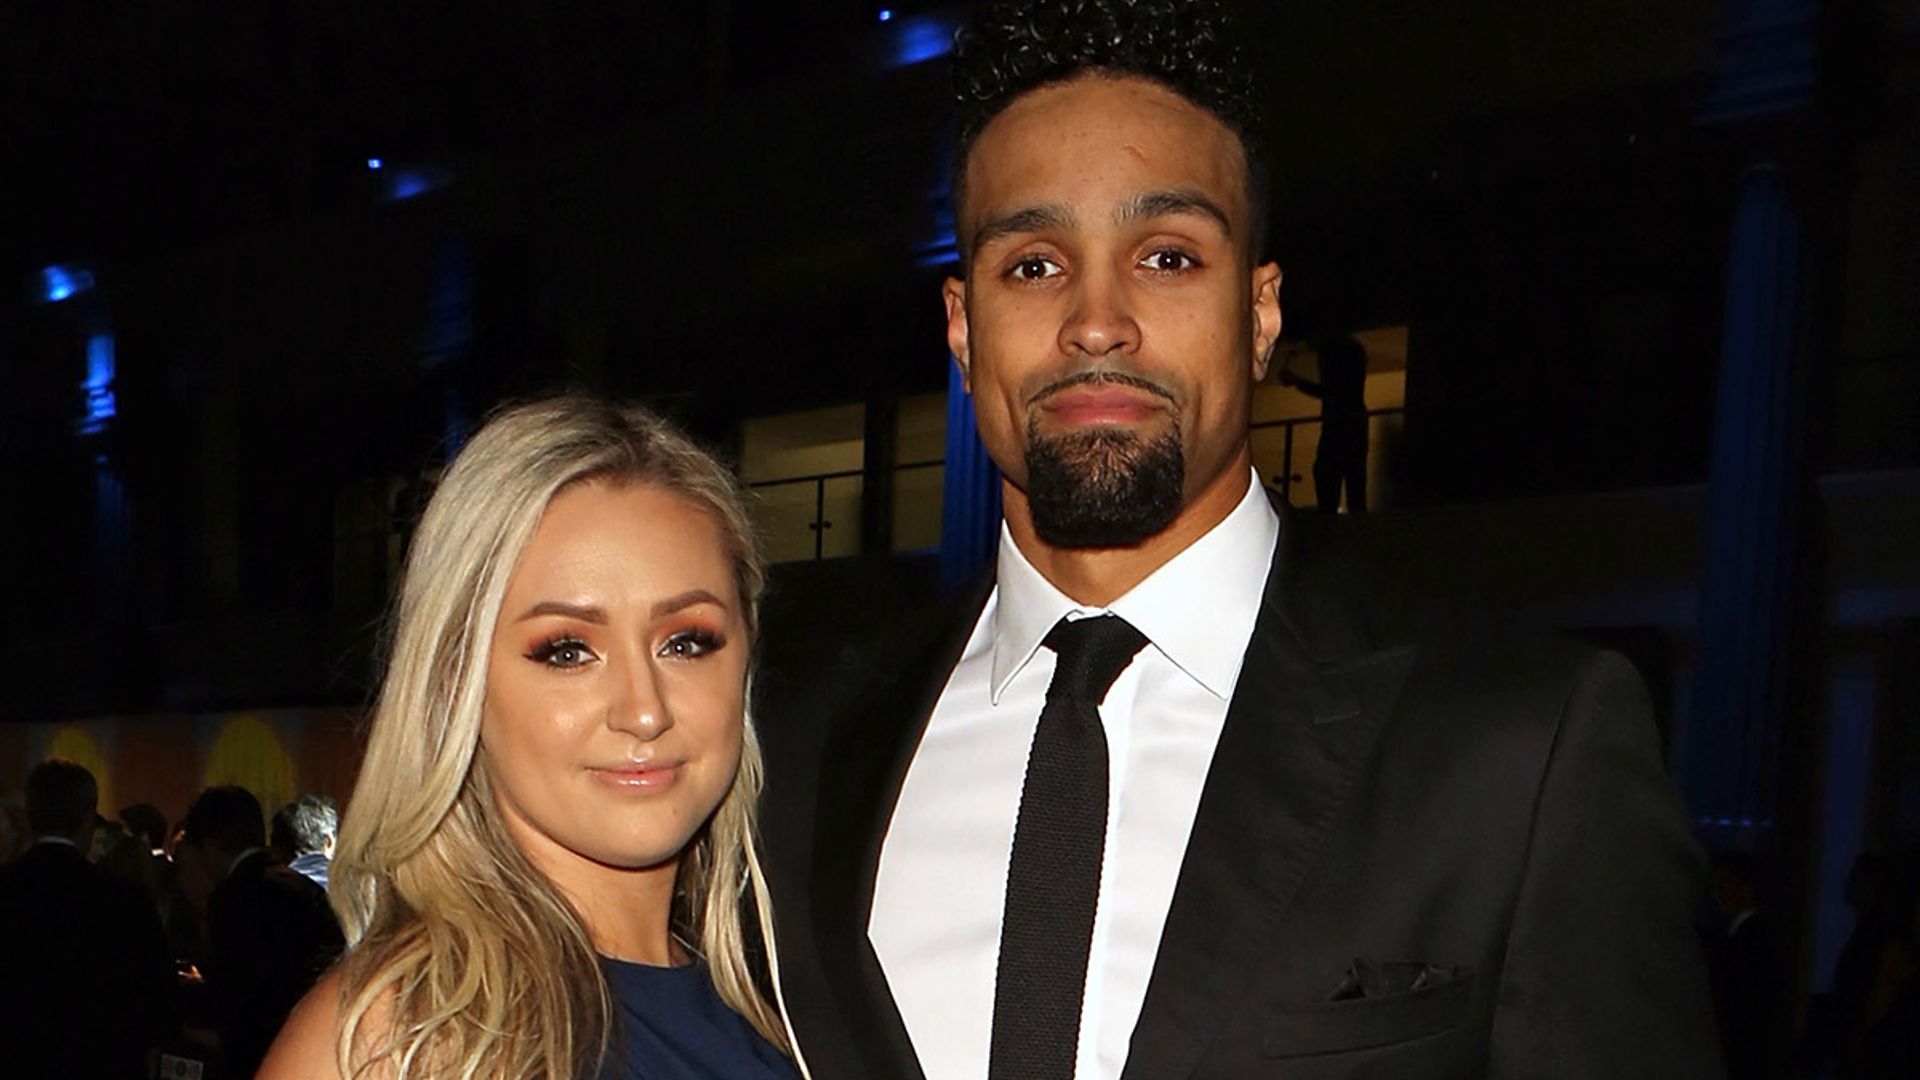 All you need to know about Ashley Banjo's love life